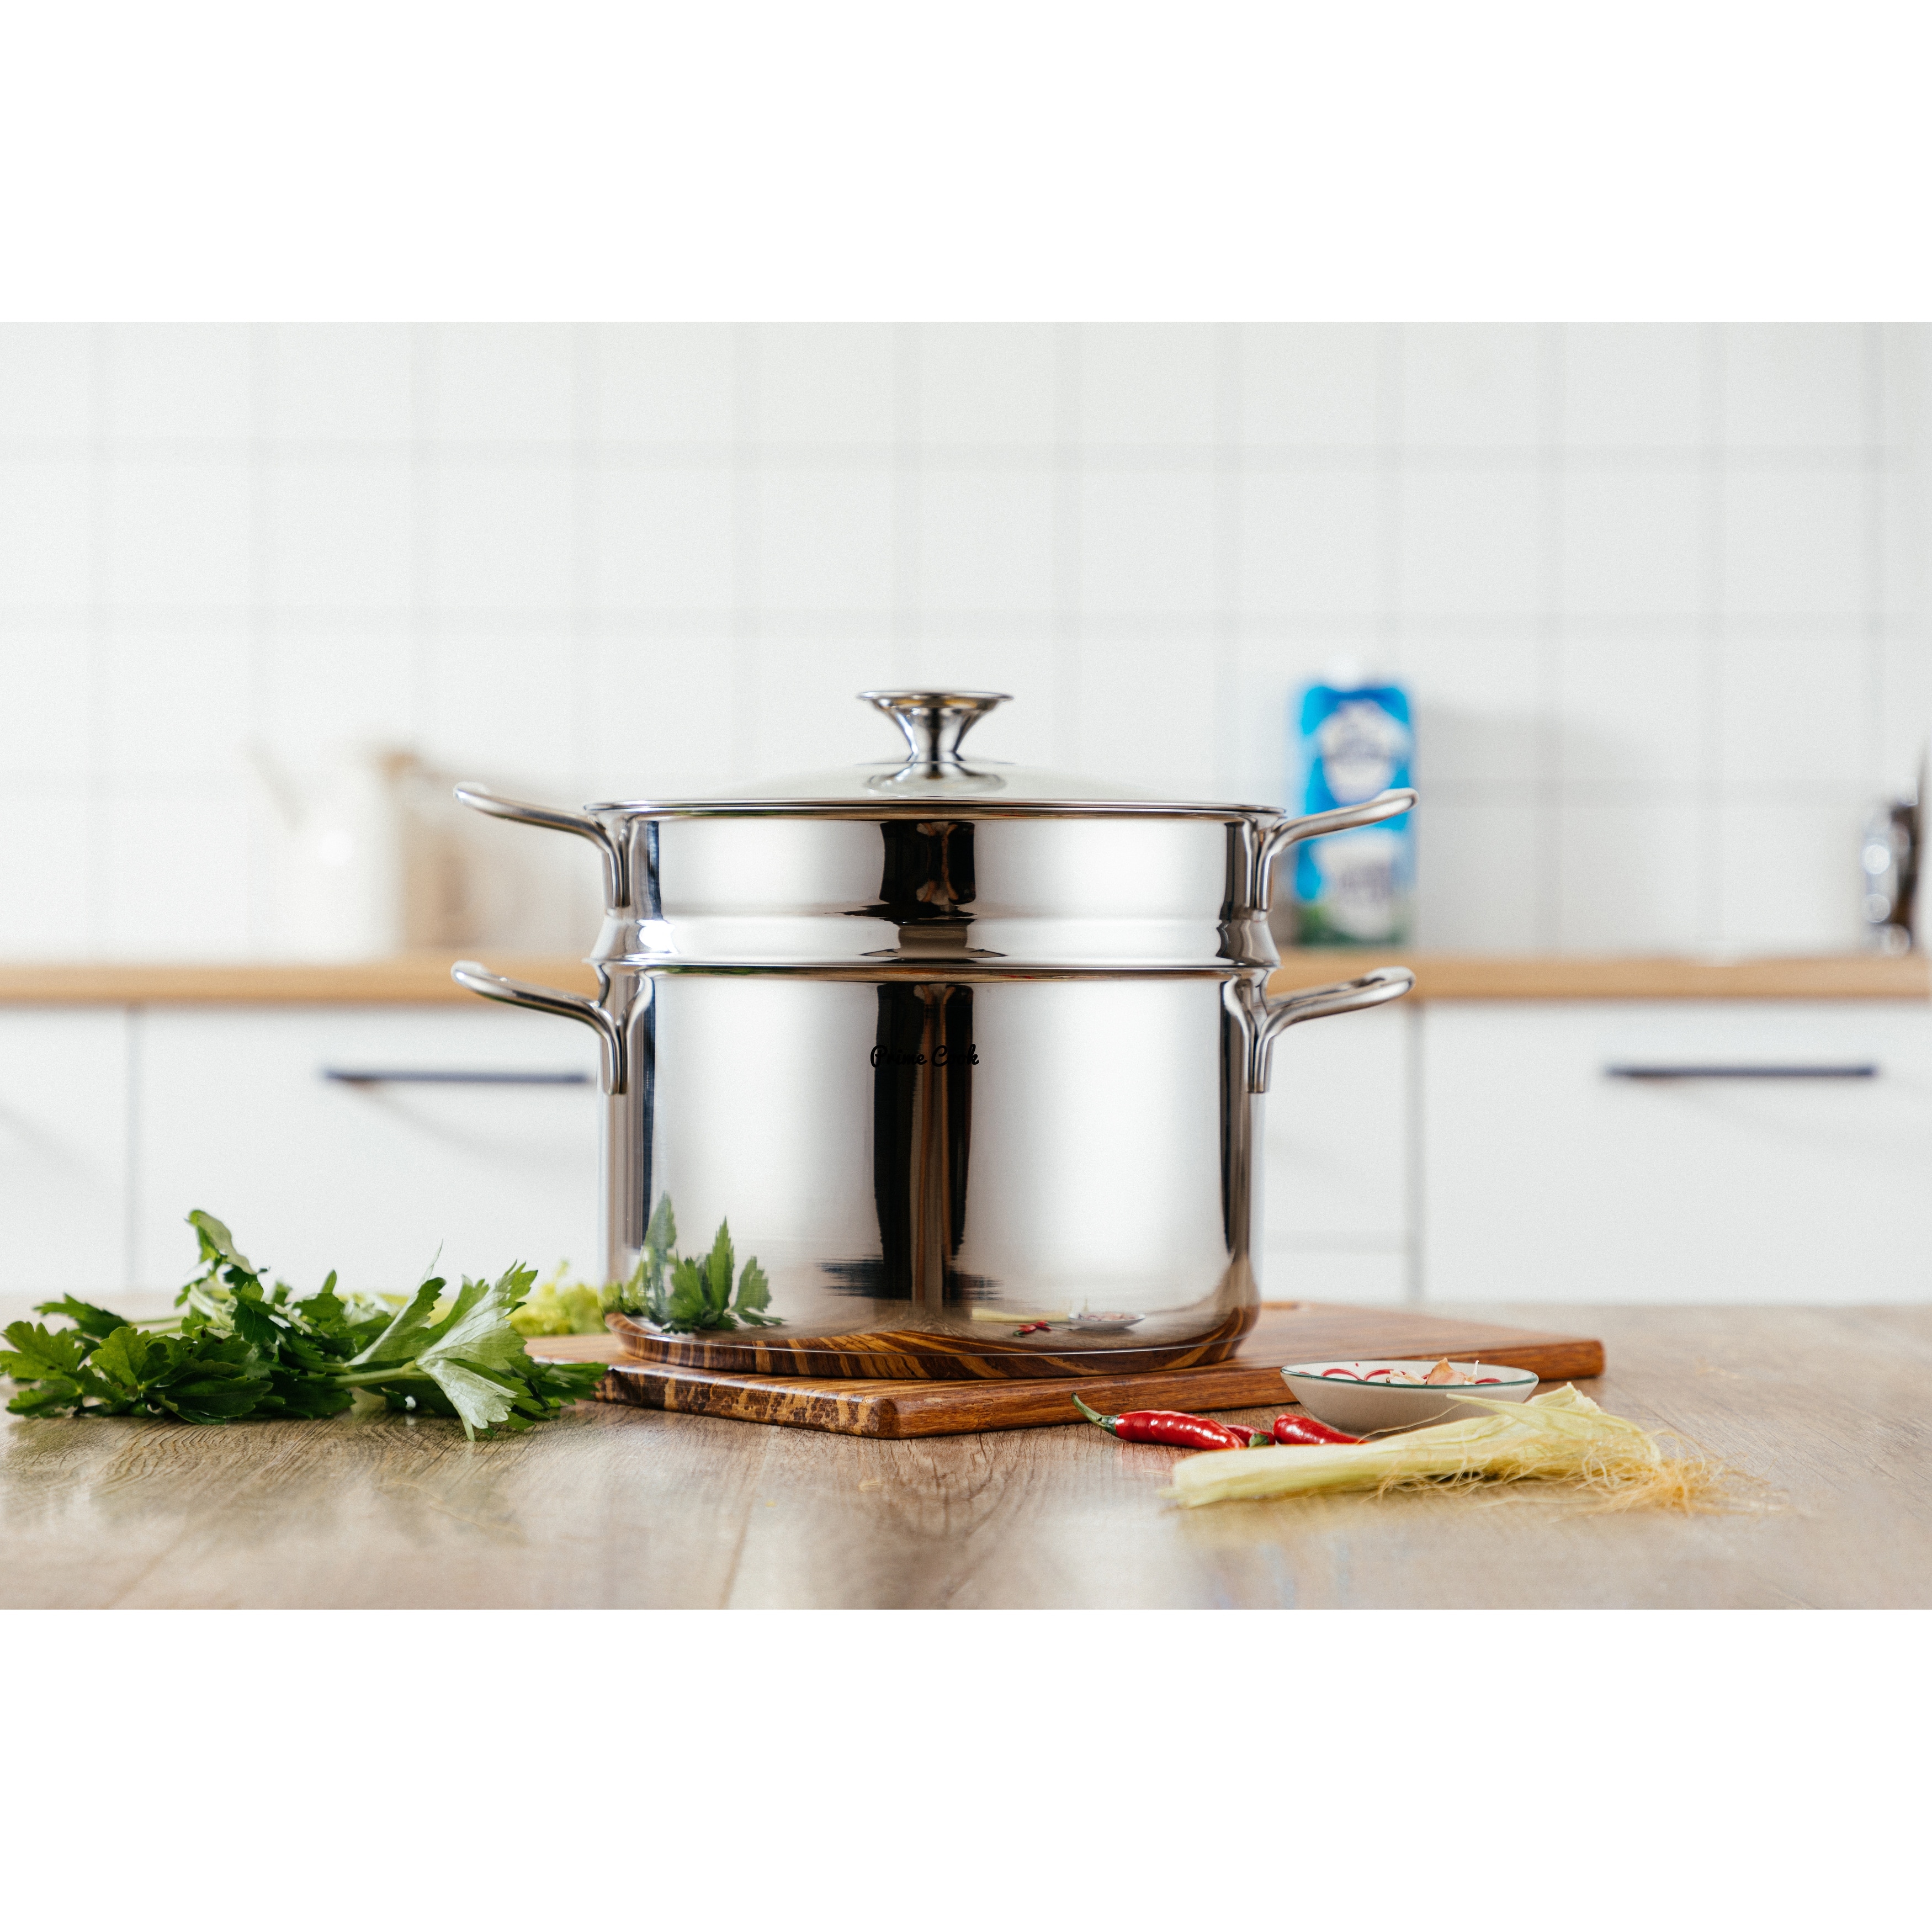 https://ak1.ostkcdn.com/images/products/is/images/direct/7960510db08b84438ef548044d8077c9d698efc6/Prime-Cook-6.4-qt.-Stainless-Steel-Steamer-Pot-with-Lid.jpg